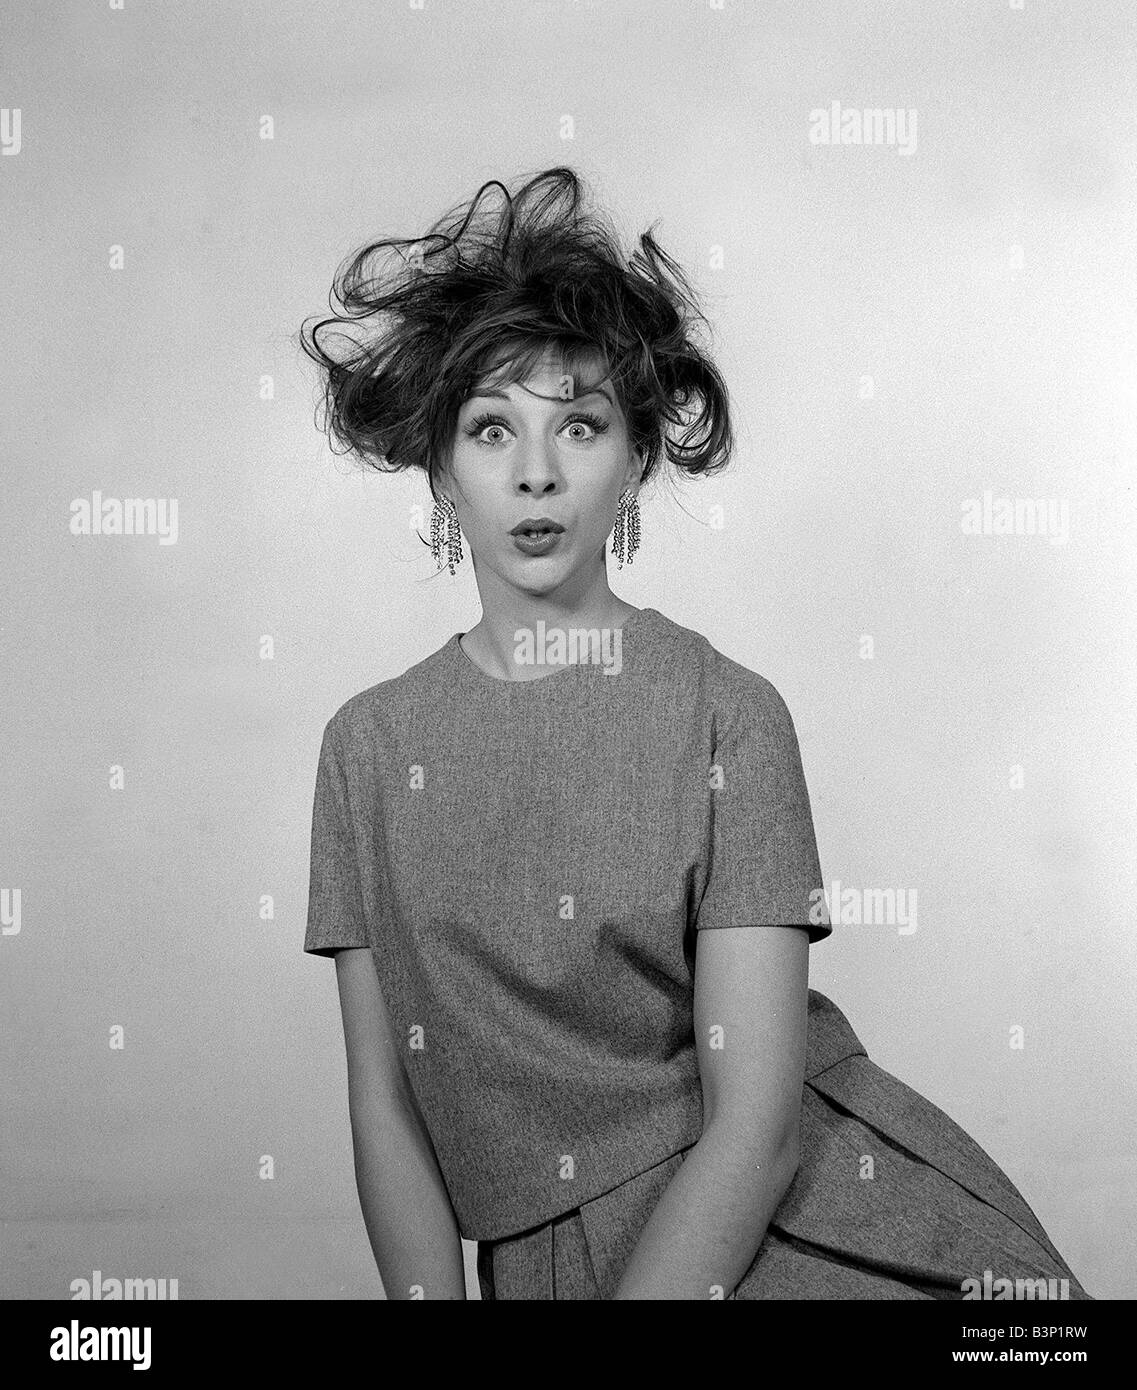 1960s Fashion Hair Styles December 1960 Woman pulling a bemused shocked  facial expression with a messed up tousled hair style Stock Photo - Alamy